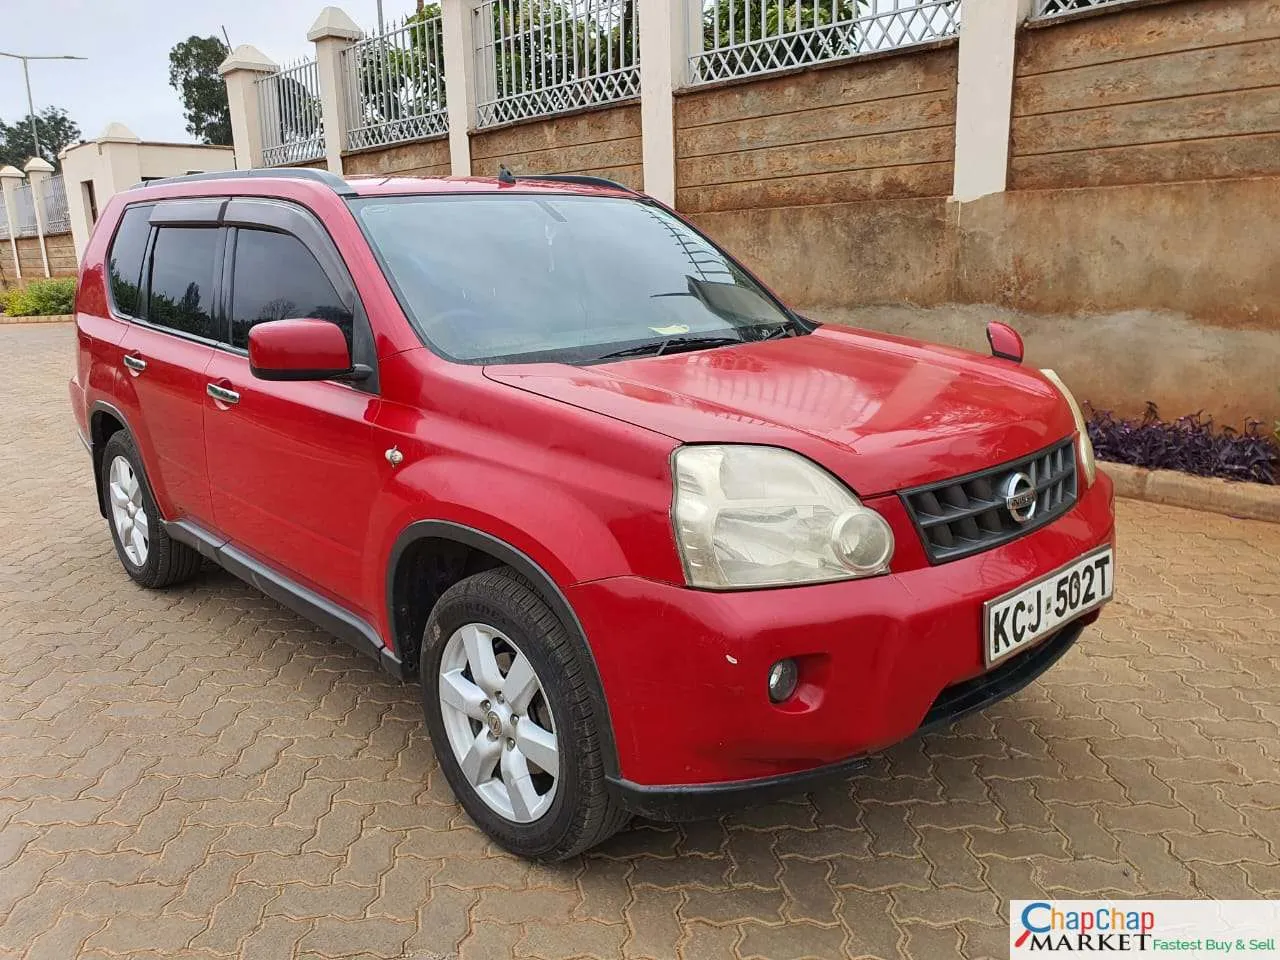 Nissan XTRAIL QUICK SALE You Pay 30% Deposit Trade in Ok XTRAIL for sale in kenya hire purchase installments EXCLUSIVE